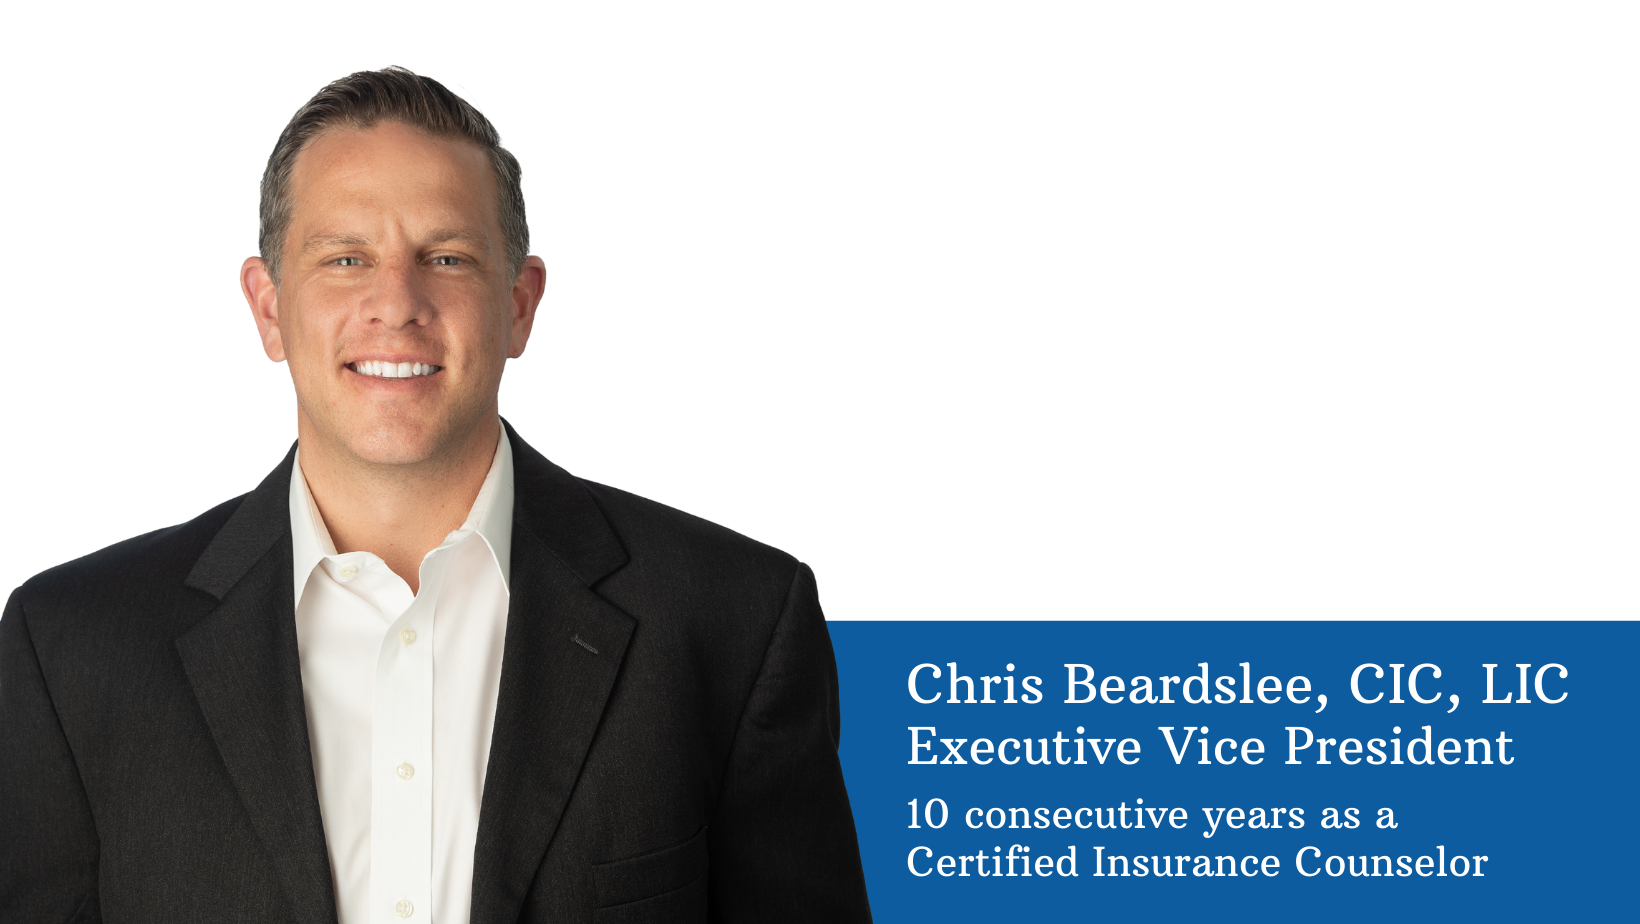 Chris Beardslee Honored by Society of Certified Insurance Counselors